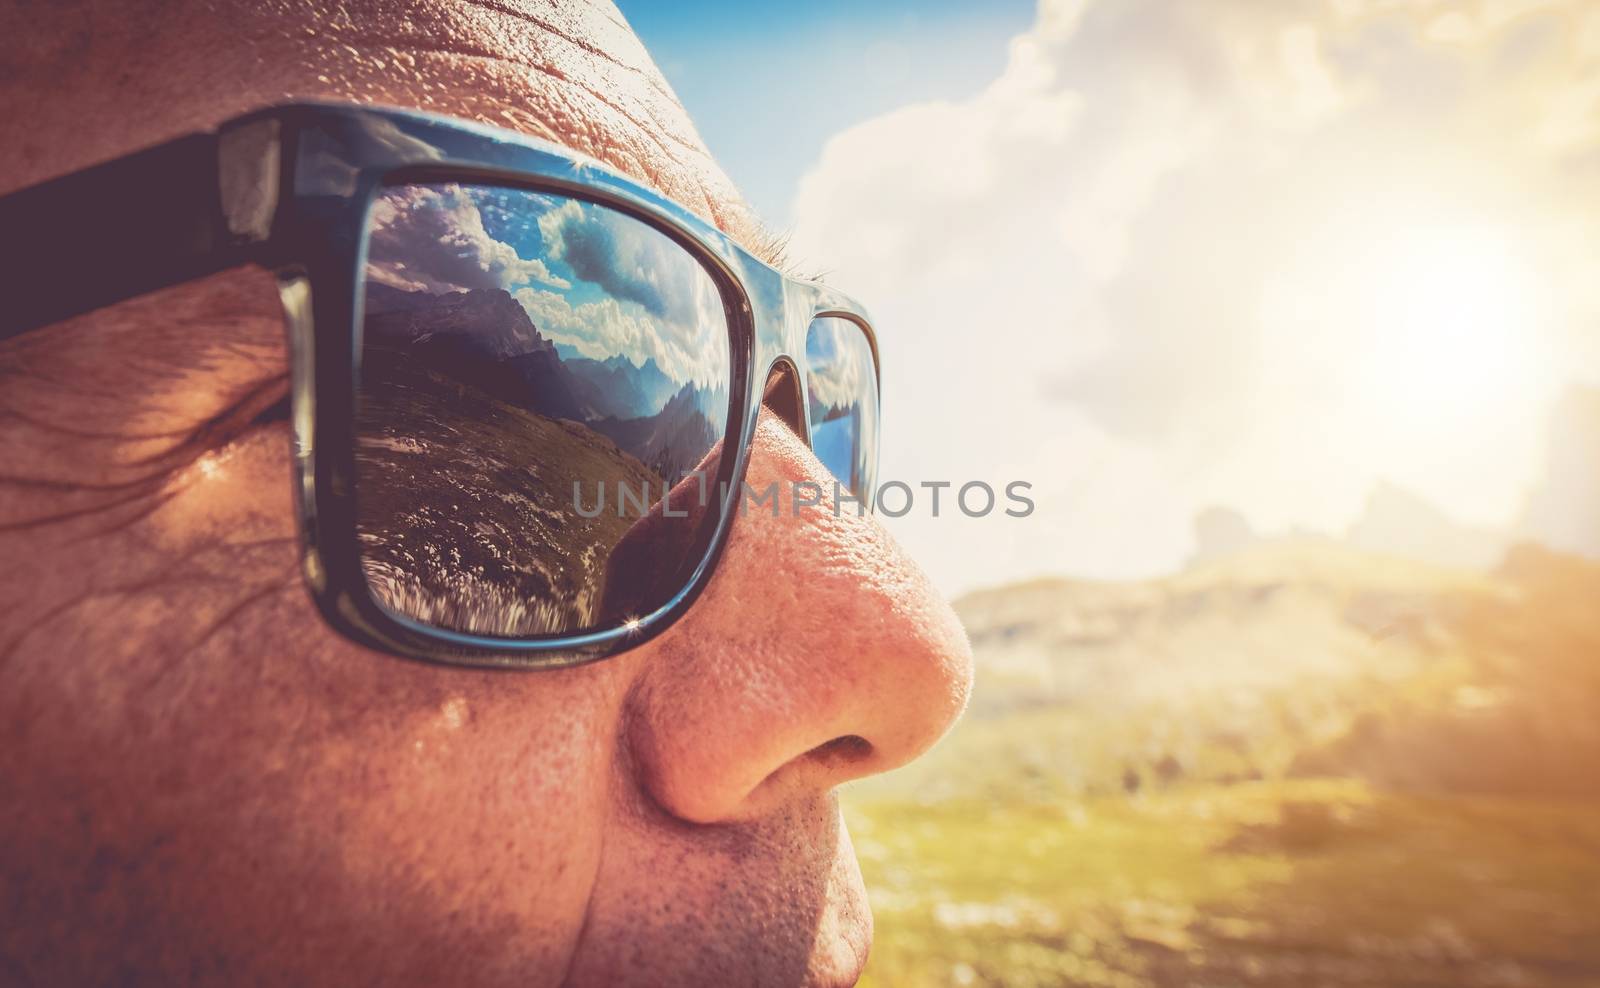 Sunglasses Protection. Caucasian Men in His 50s in the Trendy Black Sunglasses. Closeup Photo. Mountains Reflection in the Lenses.